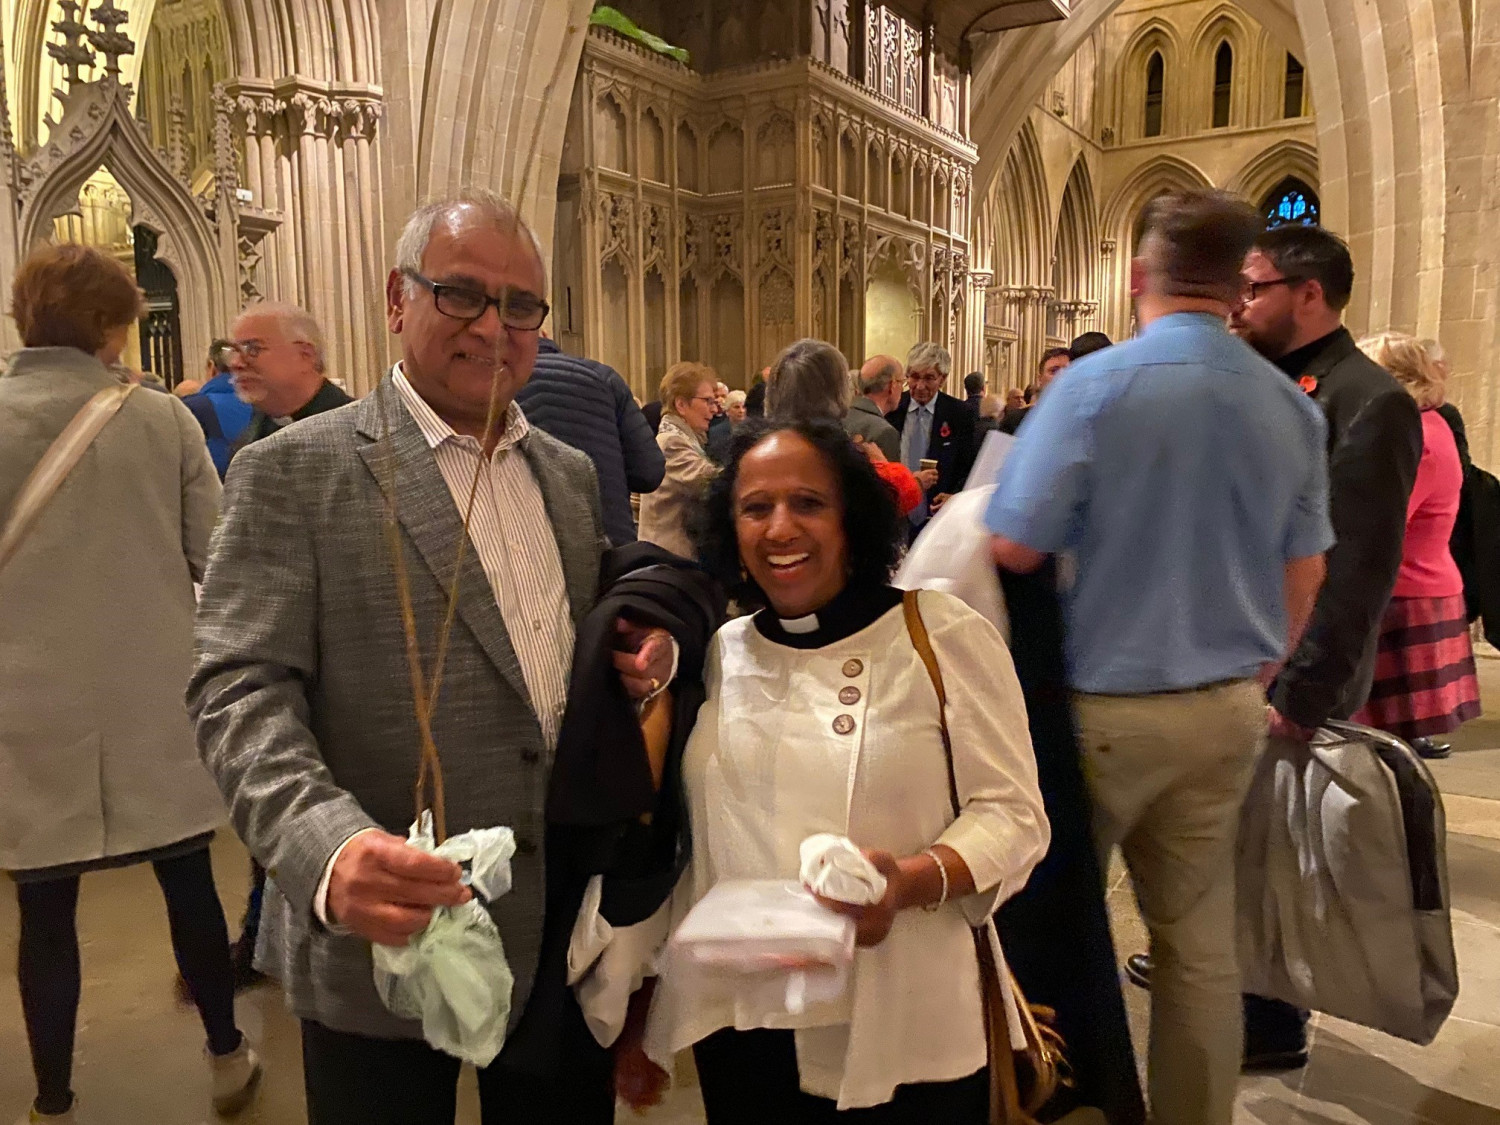 Revd Narinder Tegally and her husband Oosman with their tree